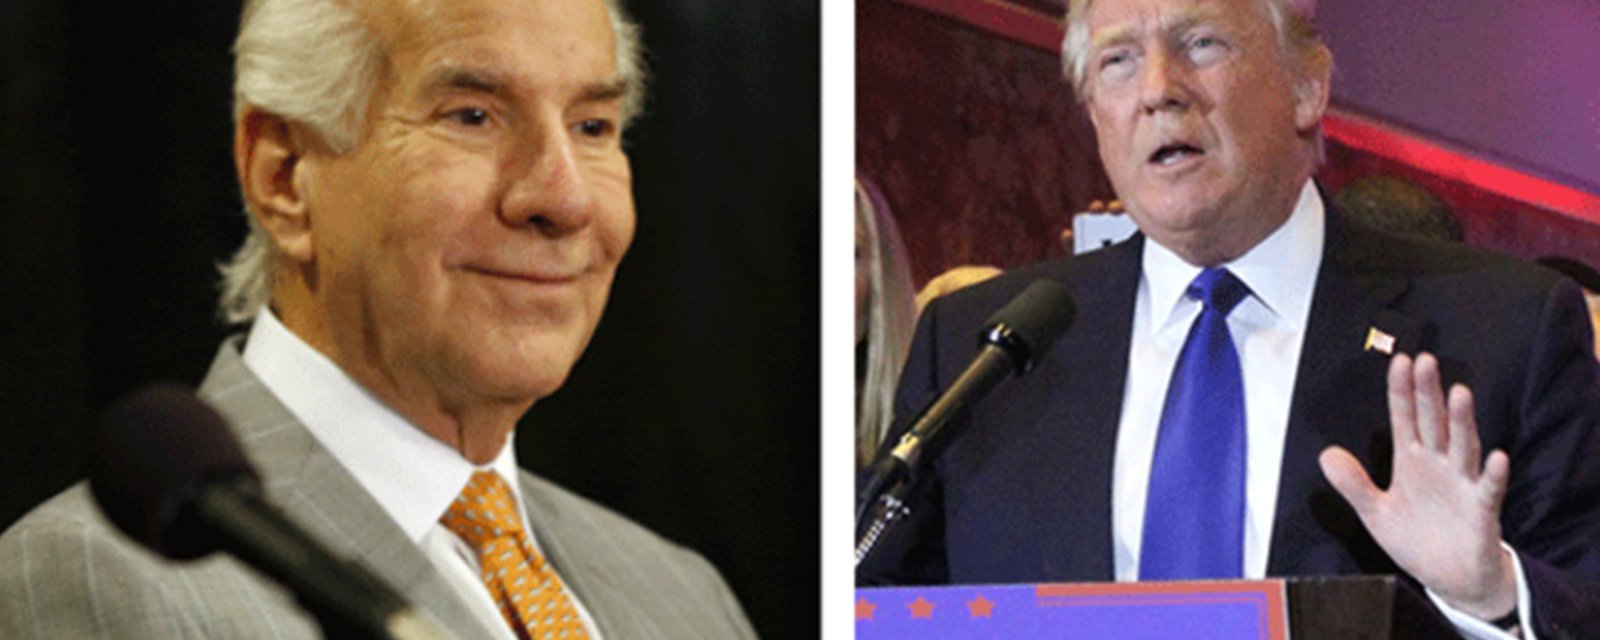 The time Ed Snider kicked Donald Trump out of his suite because he wouldn’t shut up